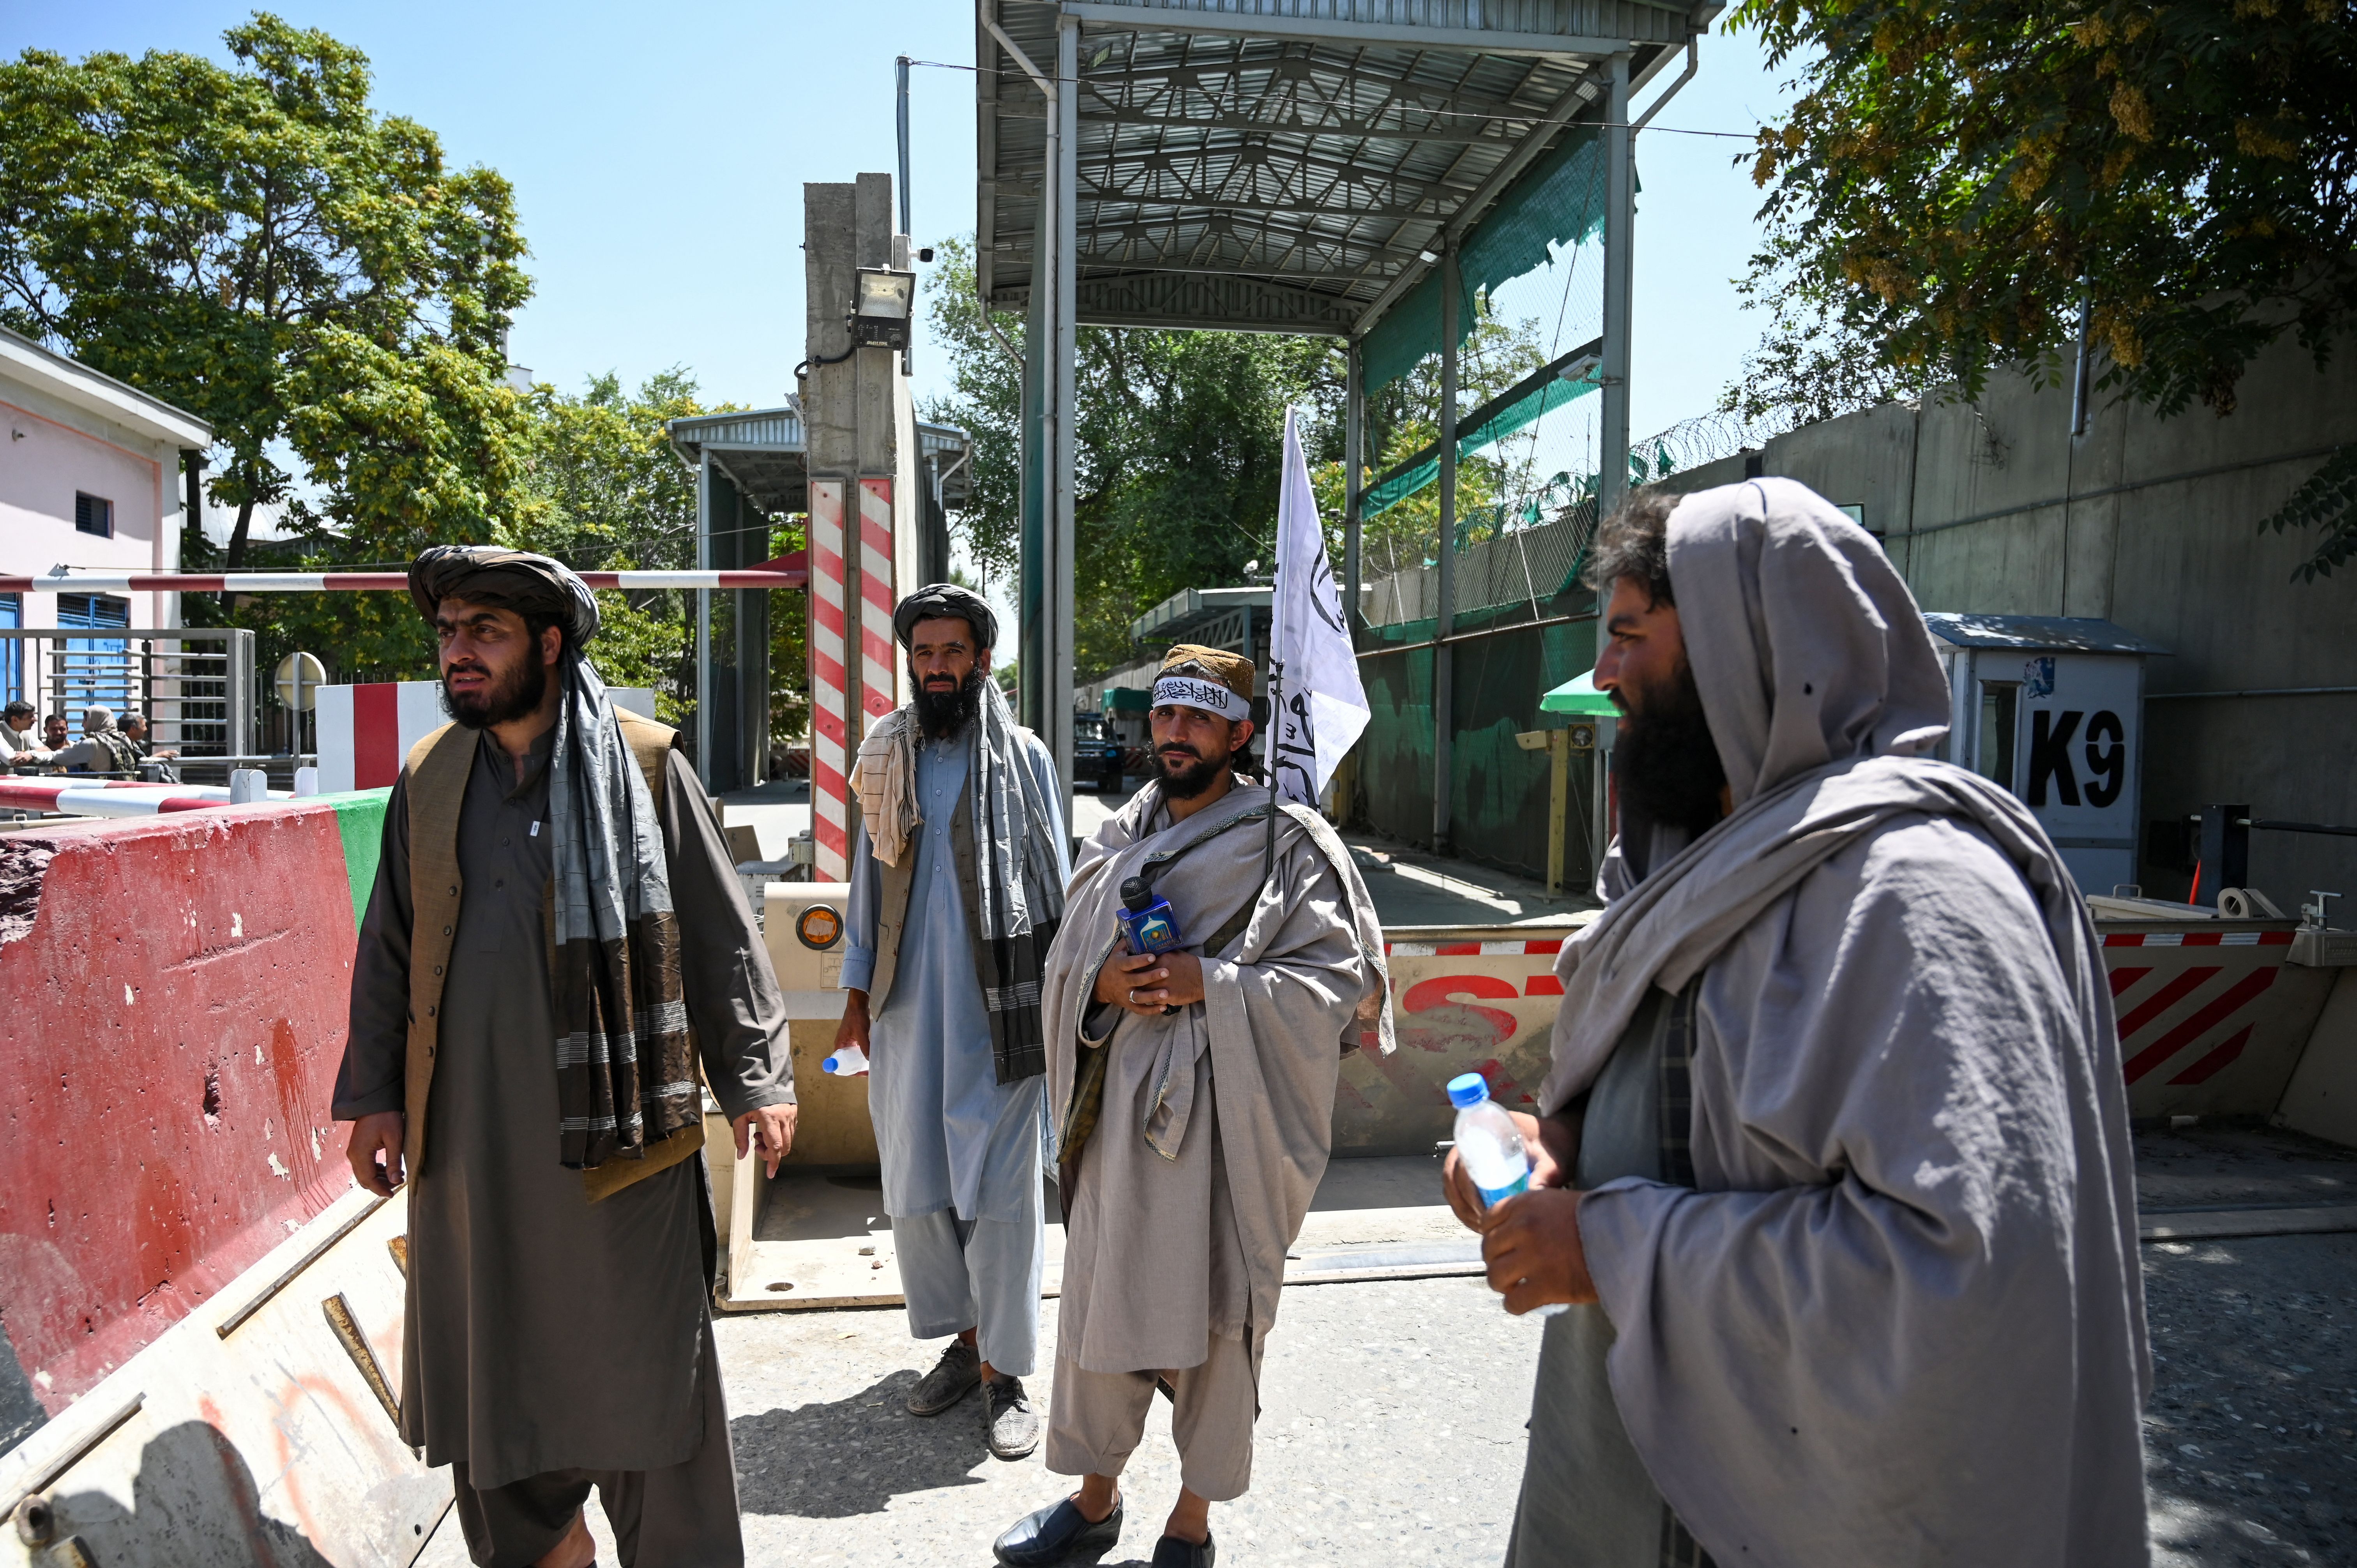 Taliban fighters stand guard at an entrance of the green zone area in Kabul on August 16